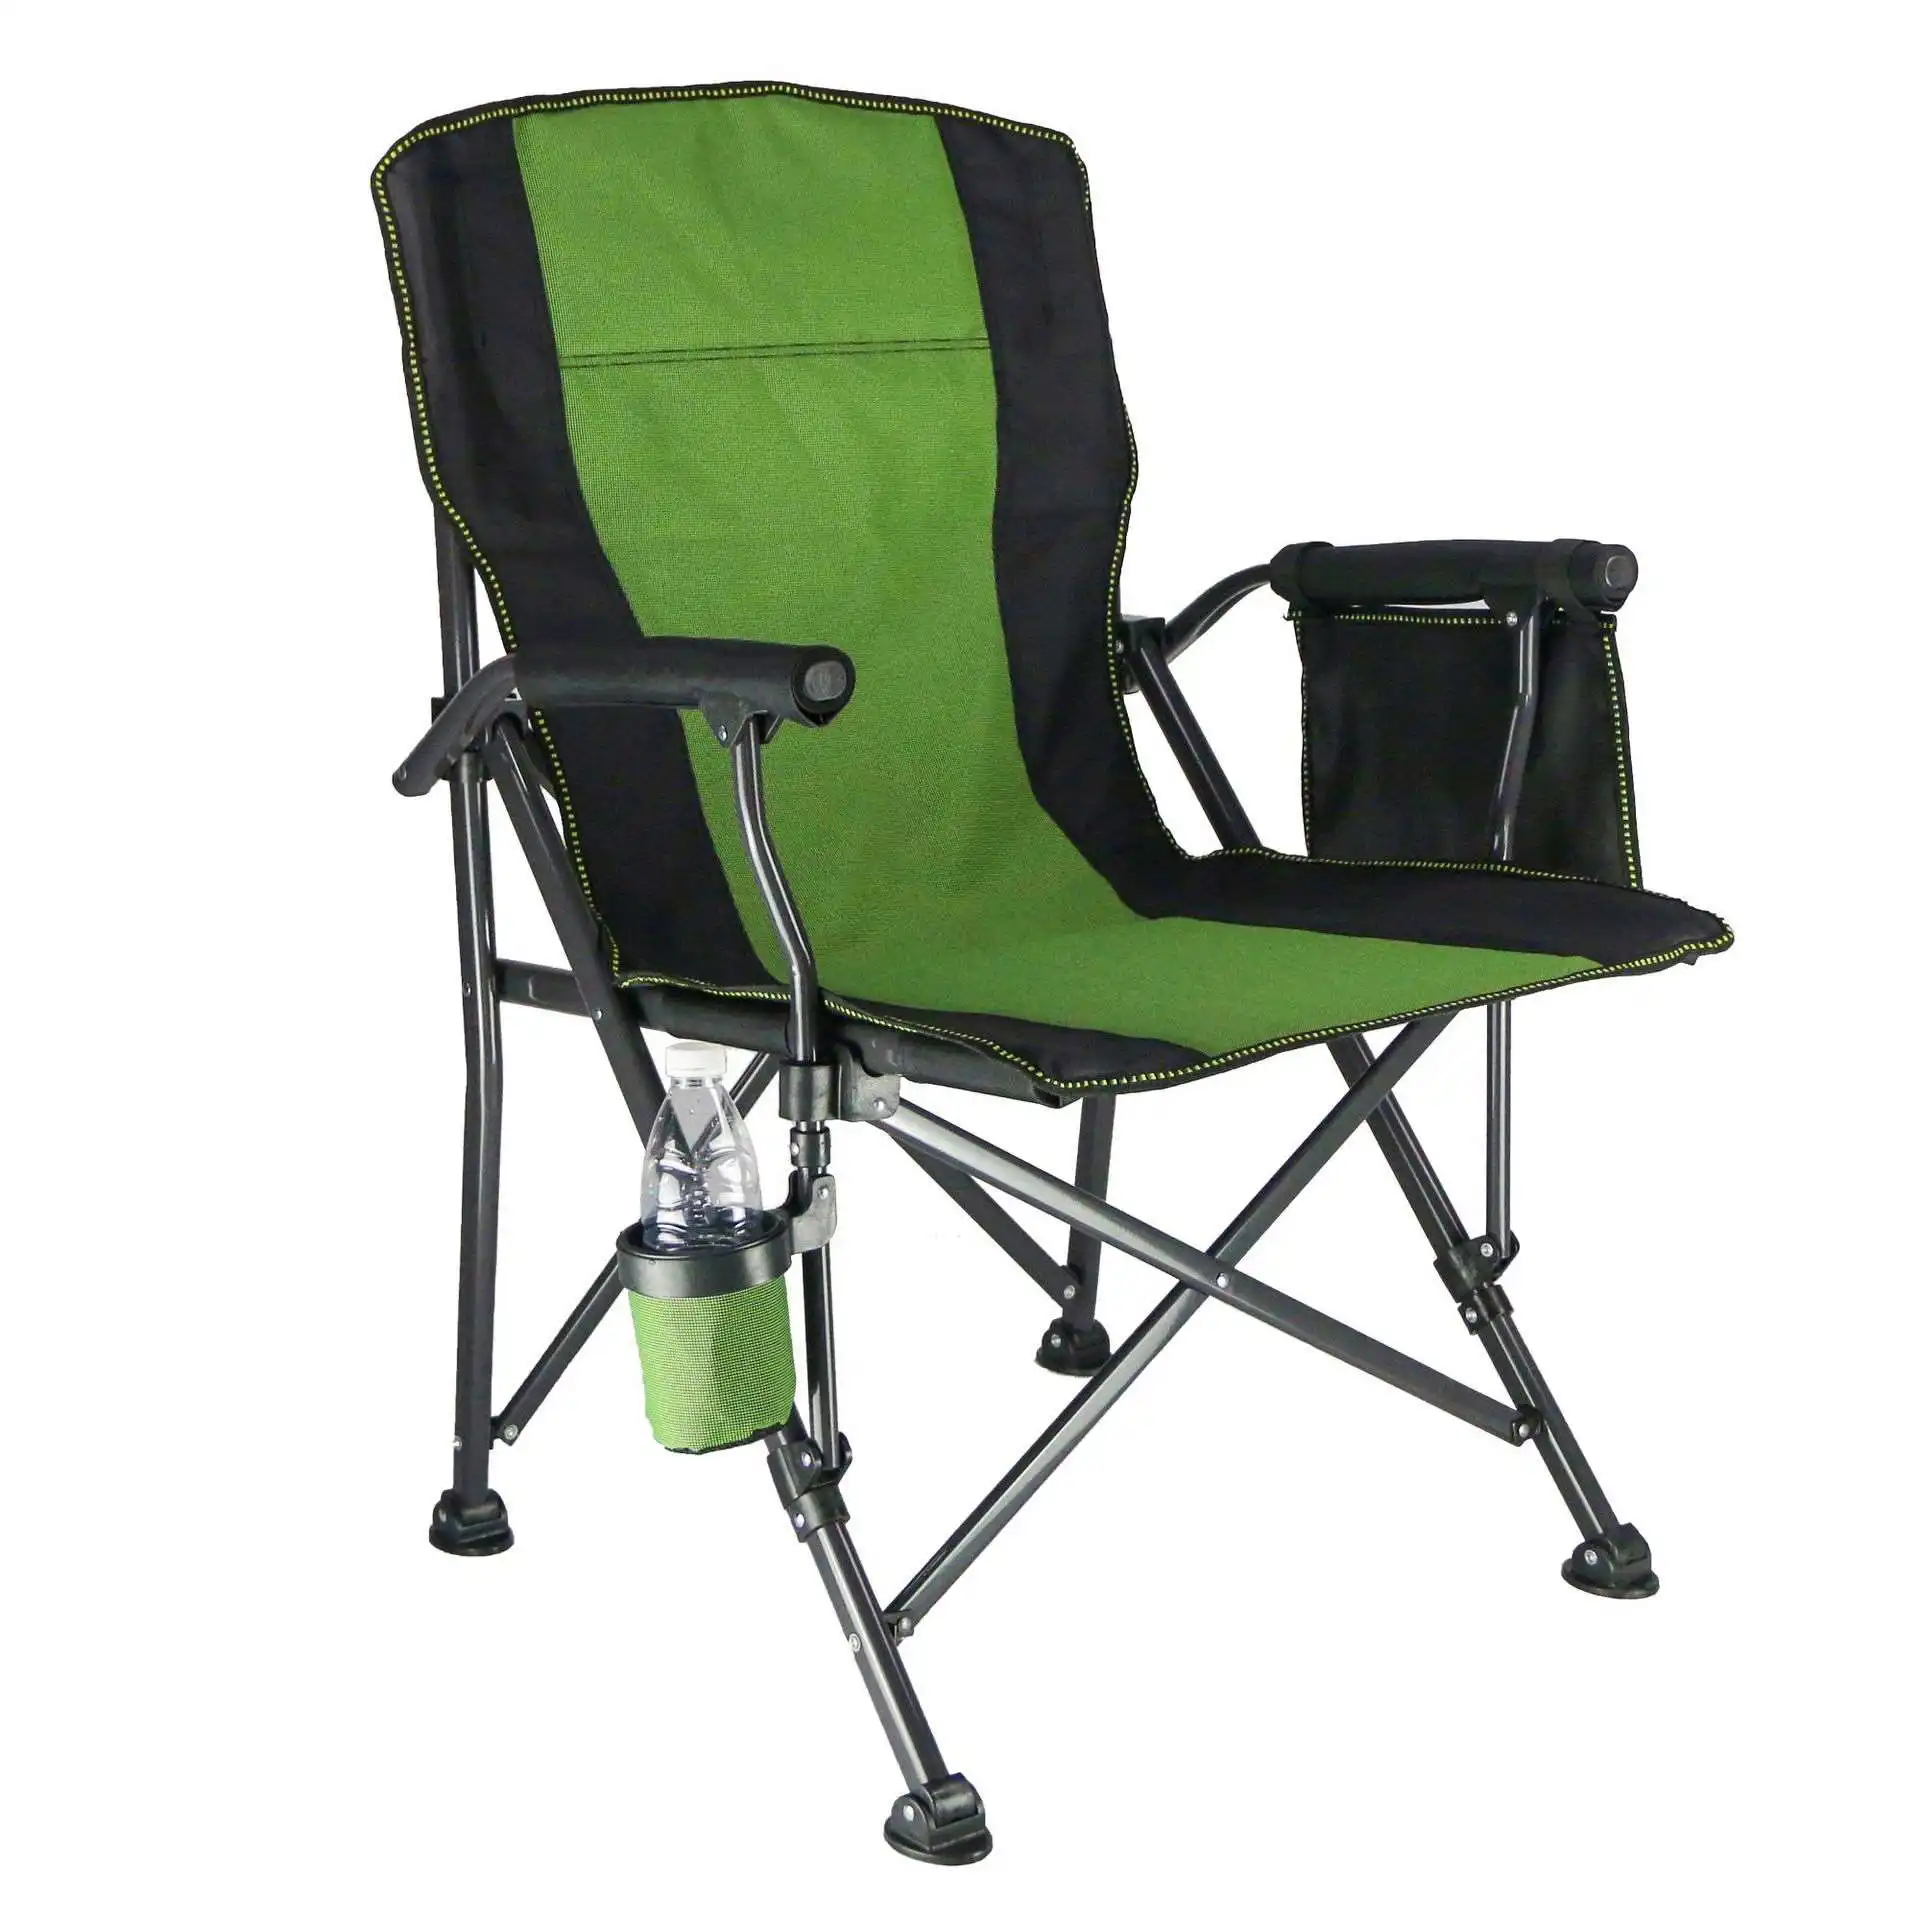 Spot New Products Competitive Price Small Folding Beach Chair